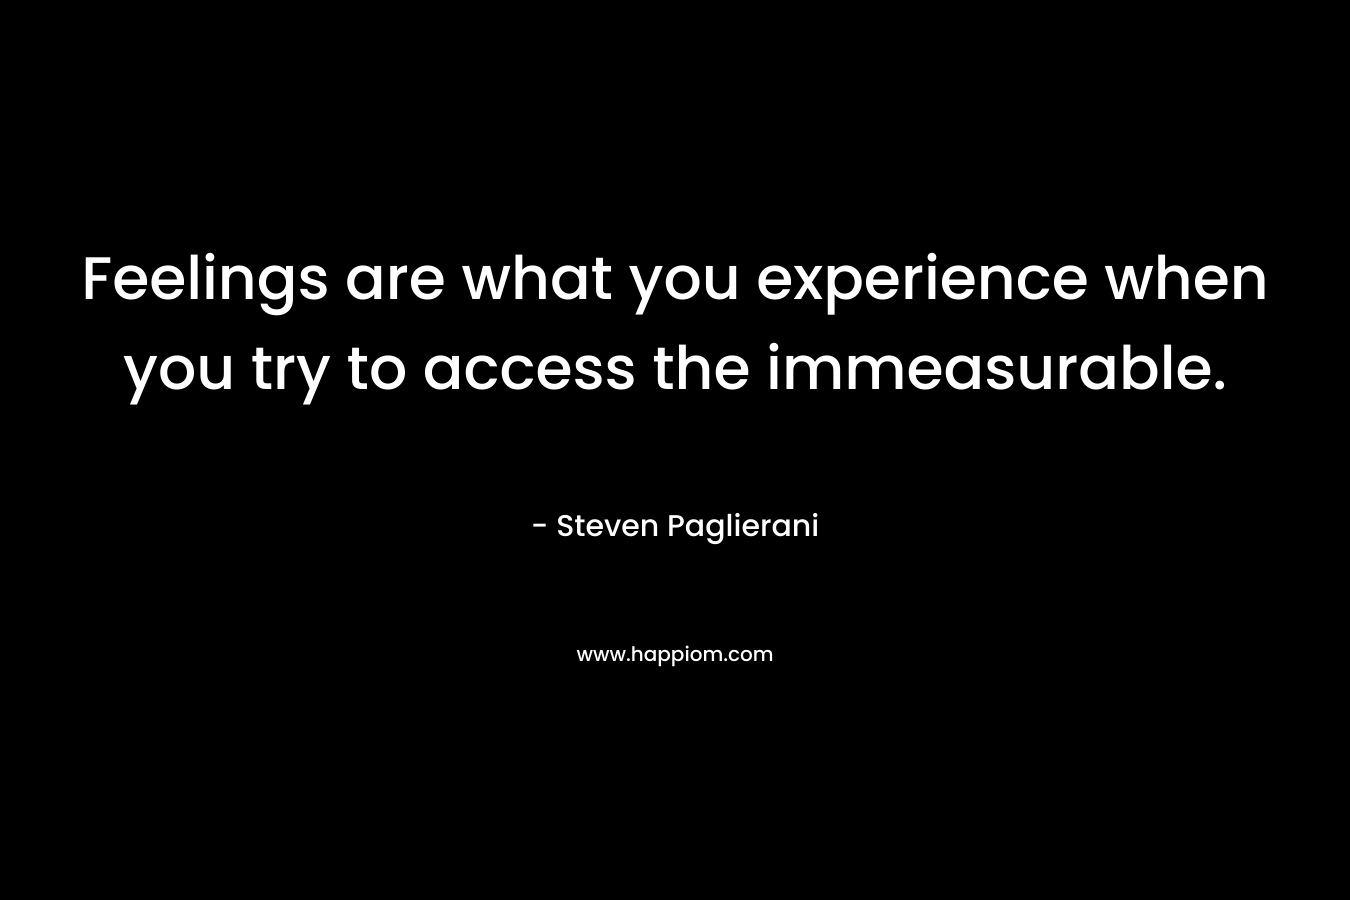 Feelings are what you experience when you try to access the immeasurable.